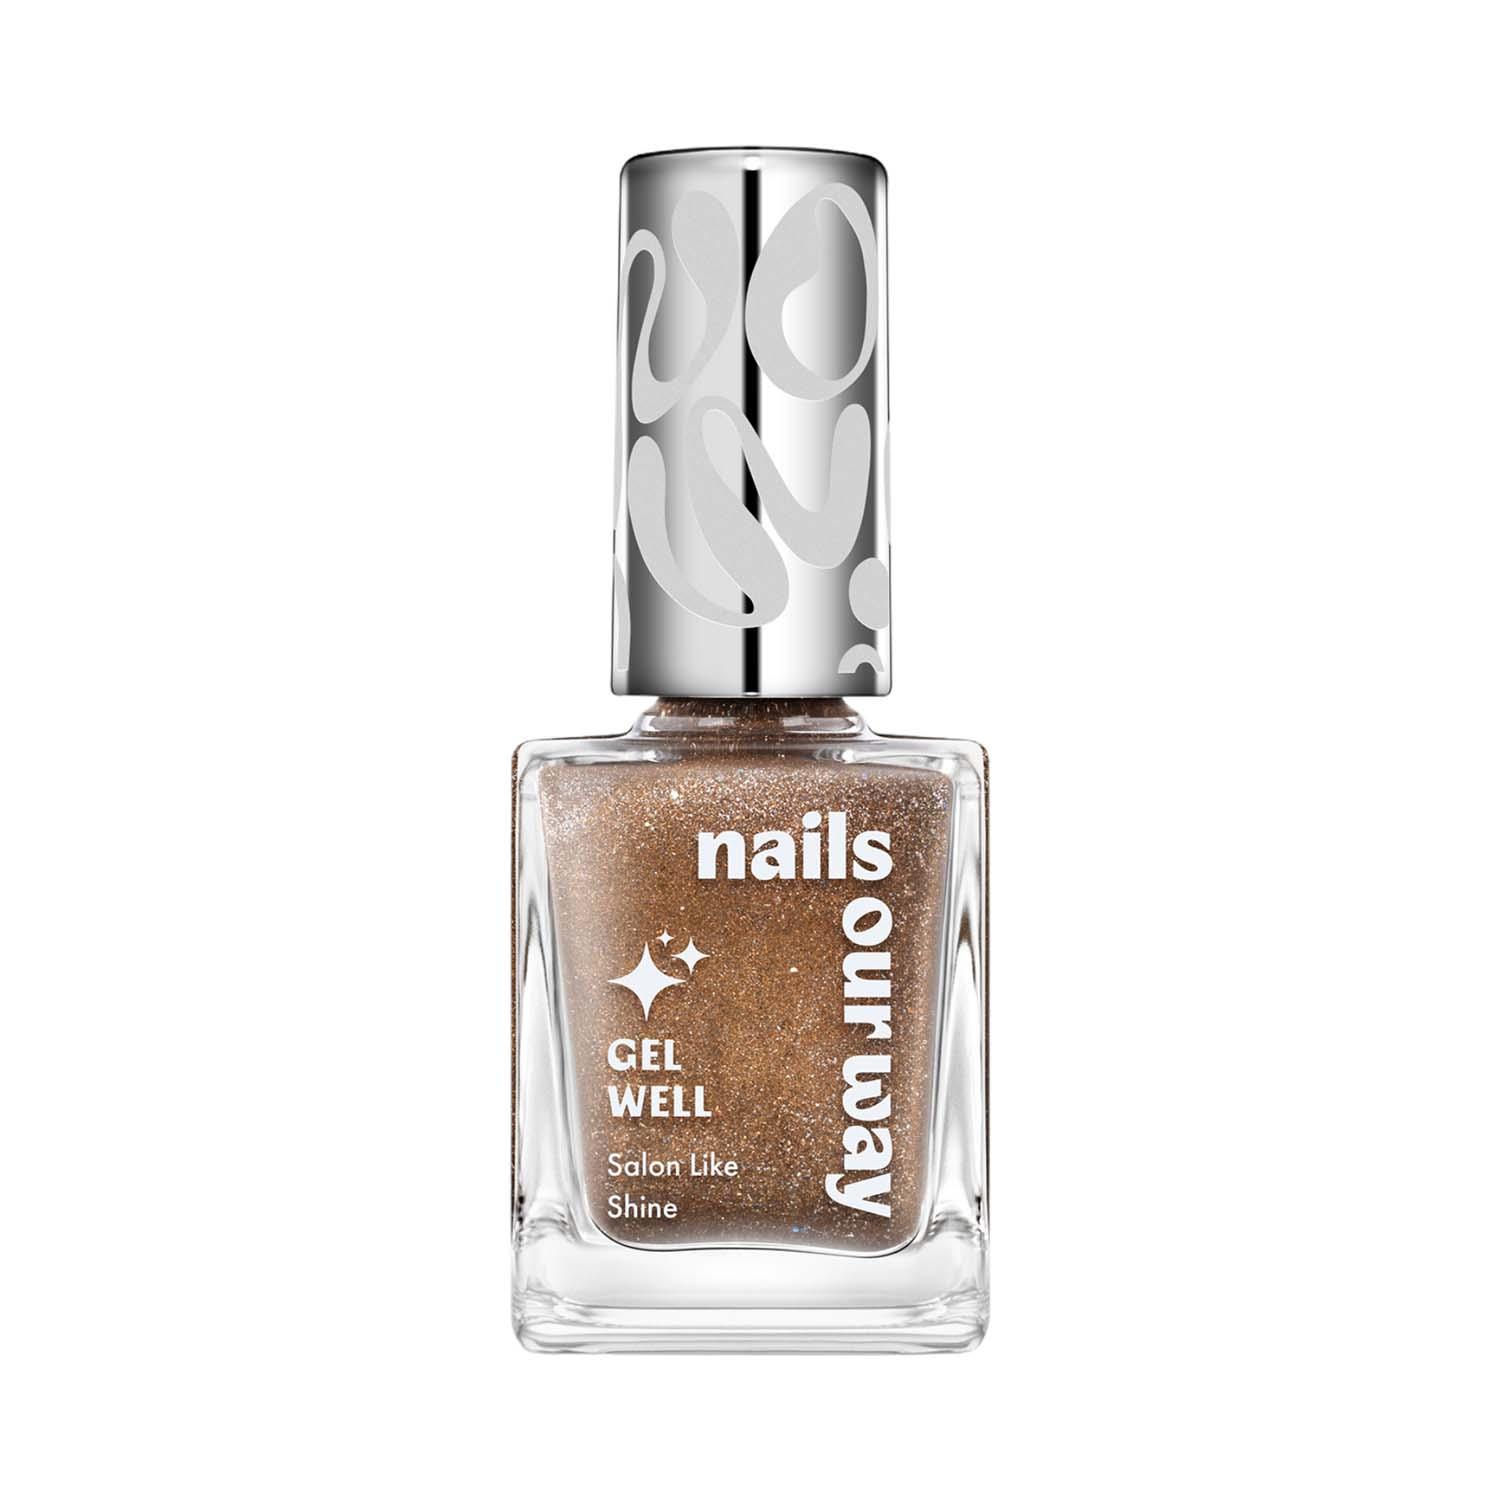 Nails Our Way Gel Well Nail Enamel - 509 Incredible (10 ml)